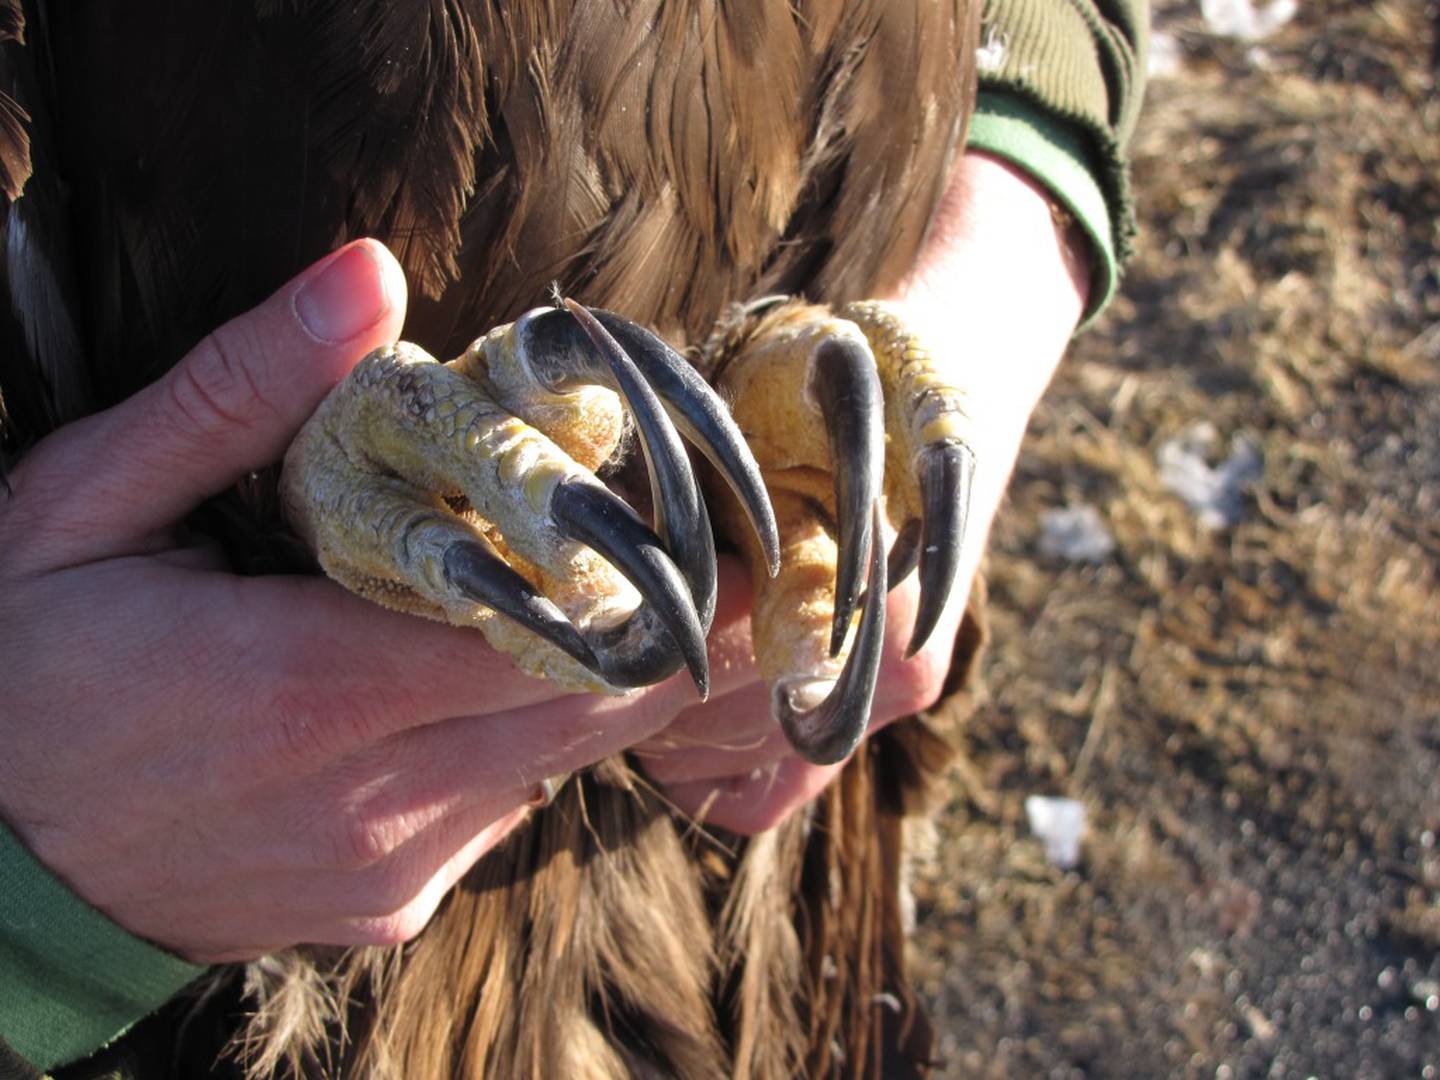 The talons of a golden eagle